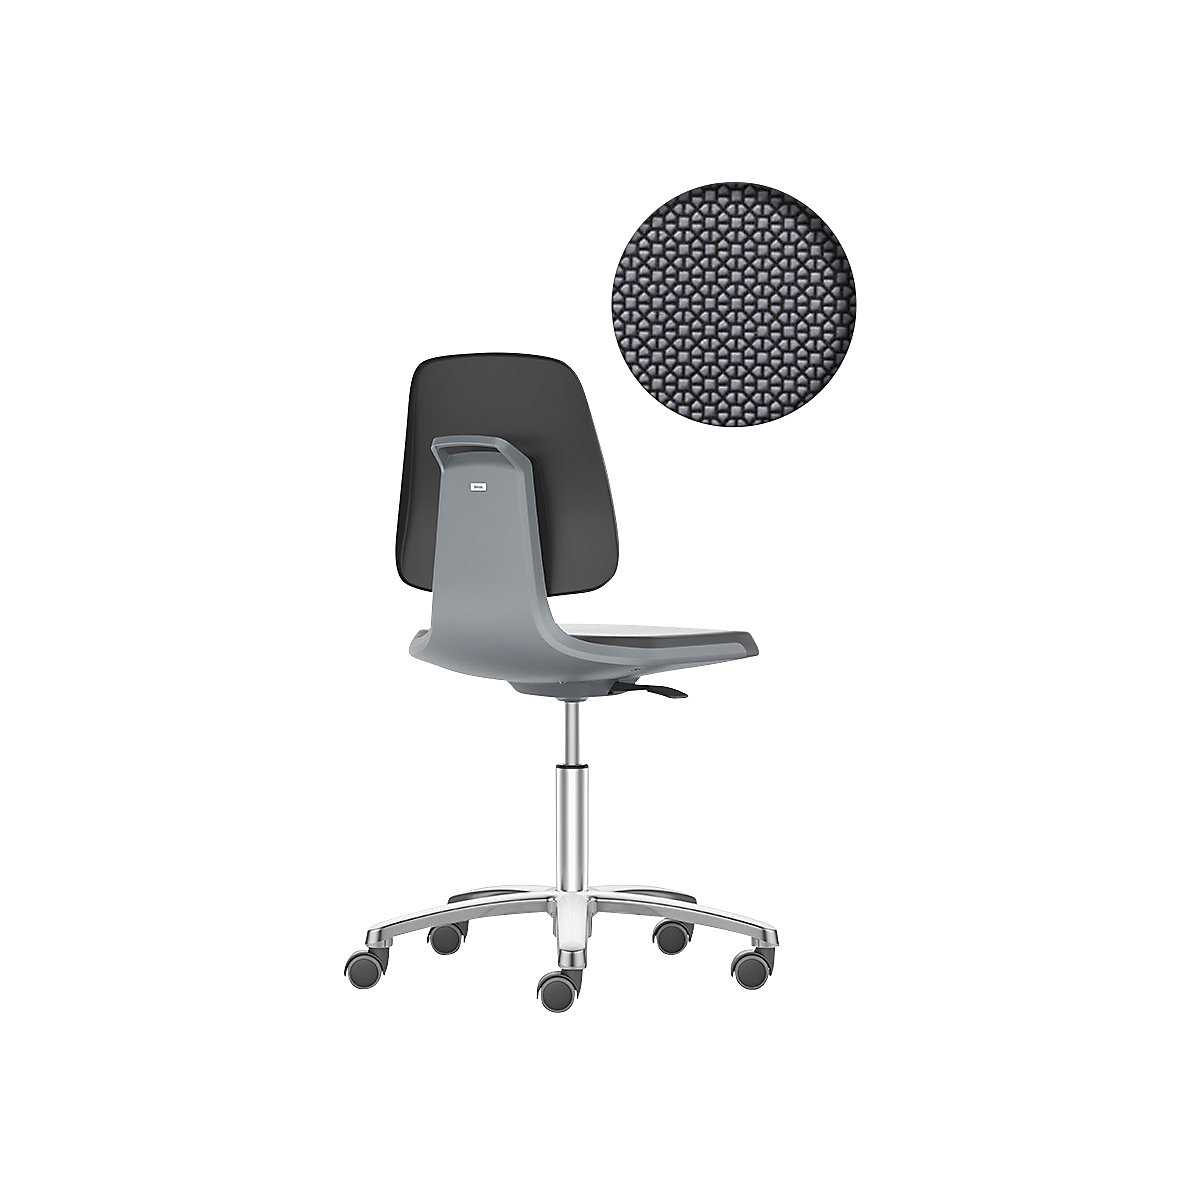 LABSIT industrial swivel chair – bimos, five-star base with castors, Supertec seat, charcoal-30